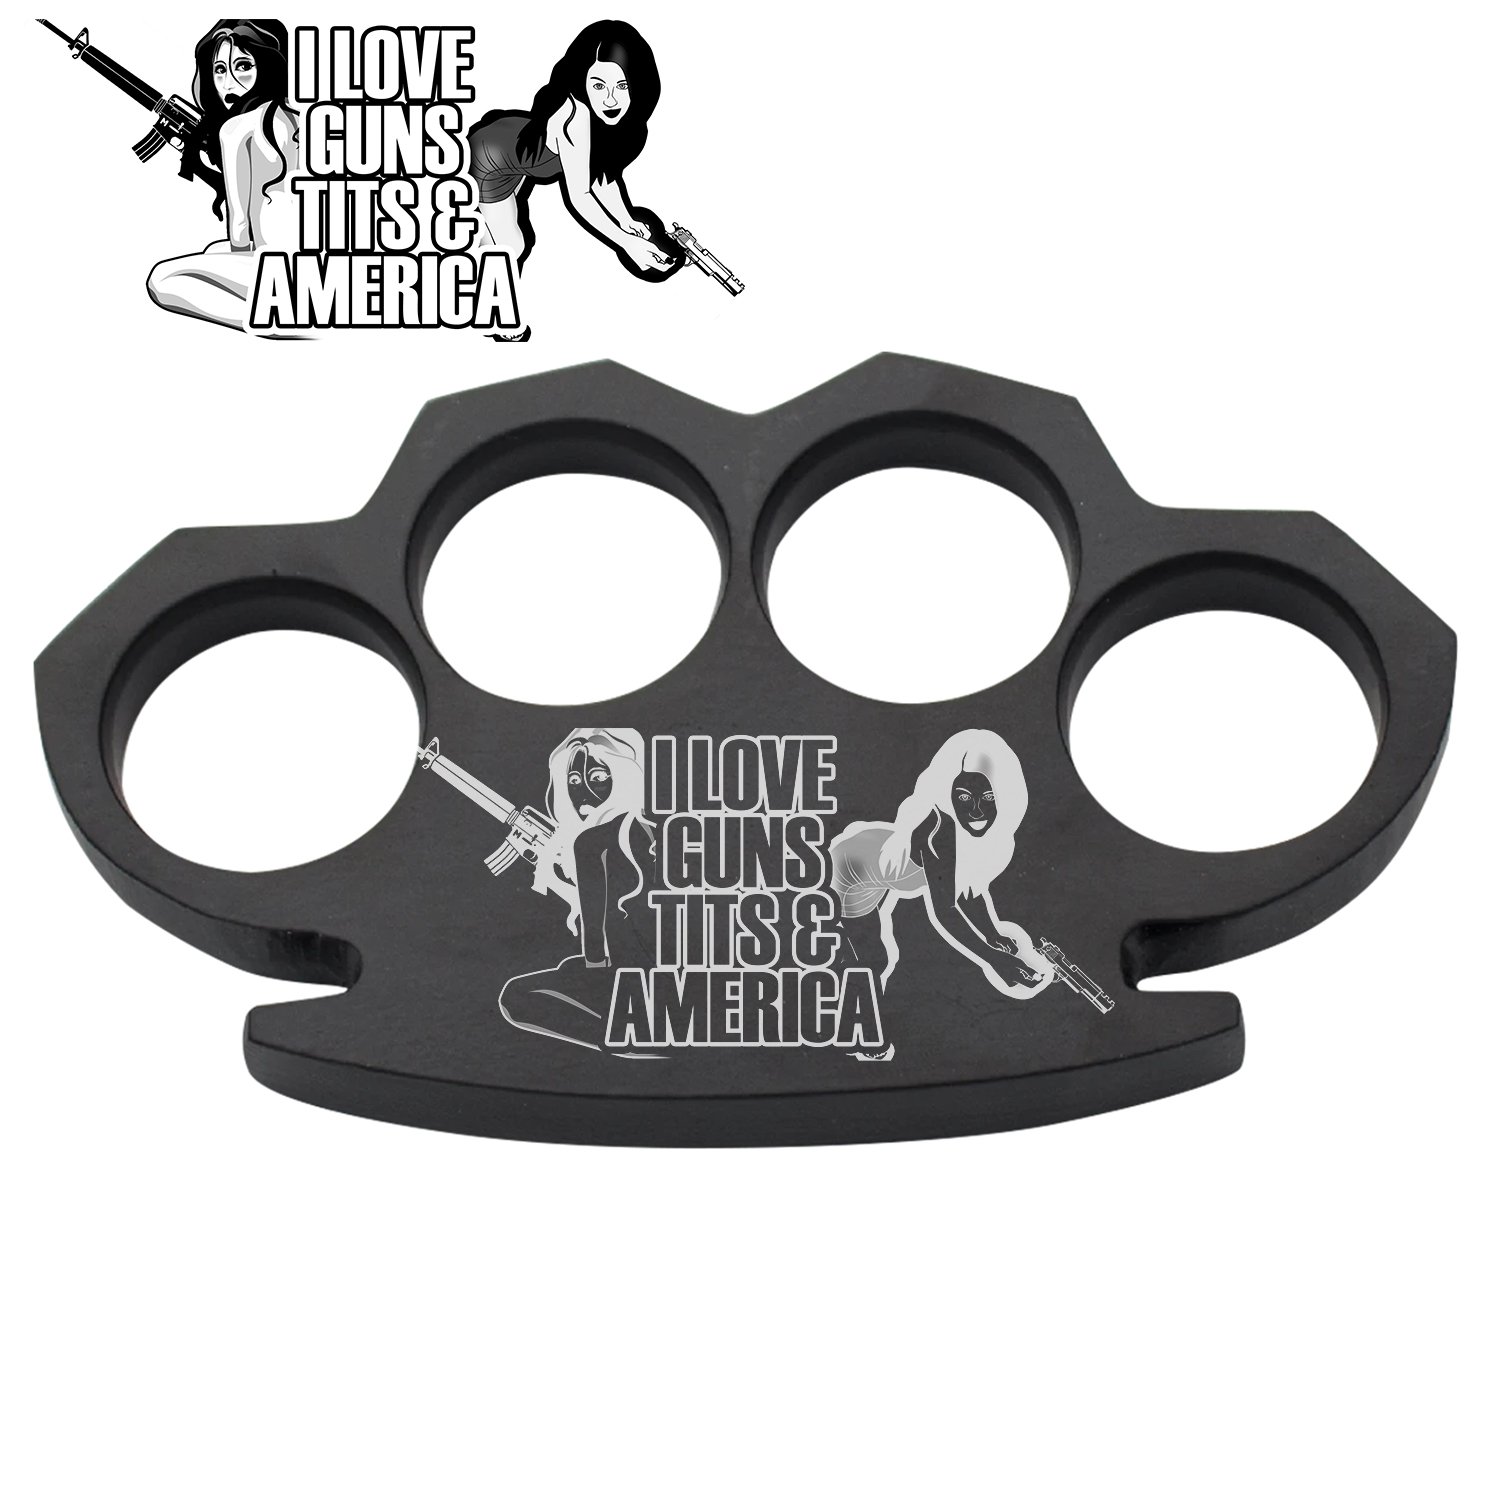 I Love Guns T ts and America Steam Punk Black Solid Metal Paper Weight